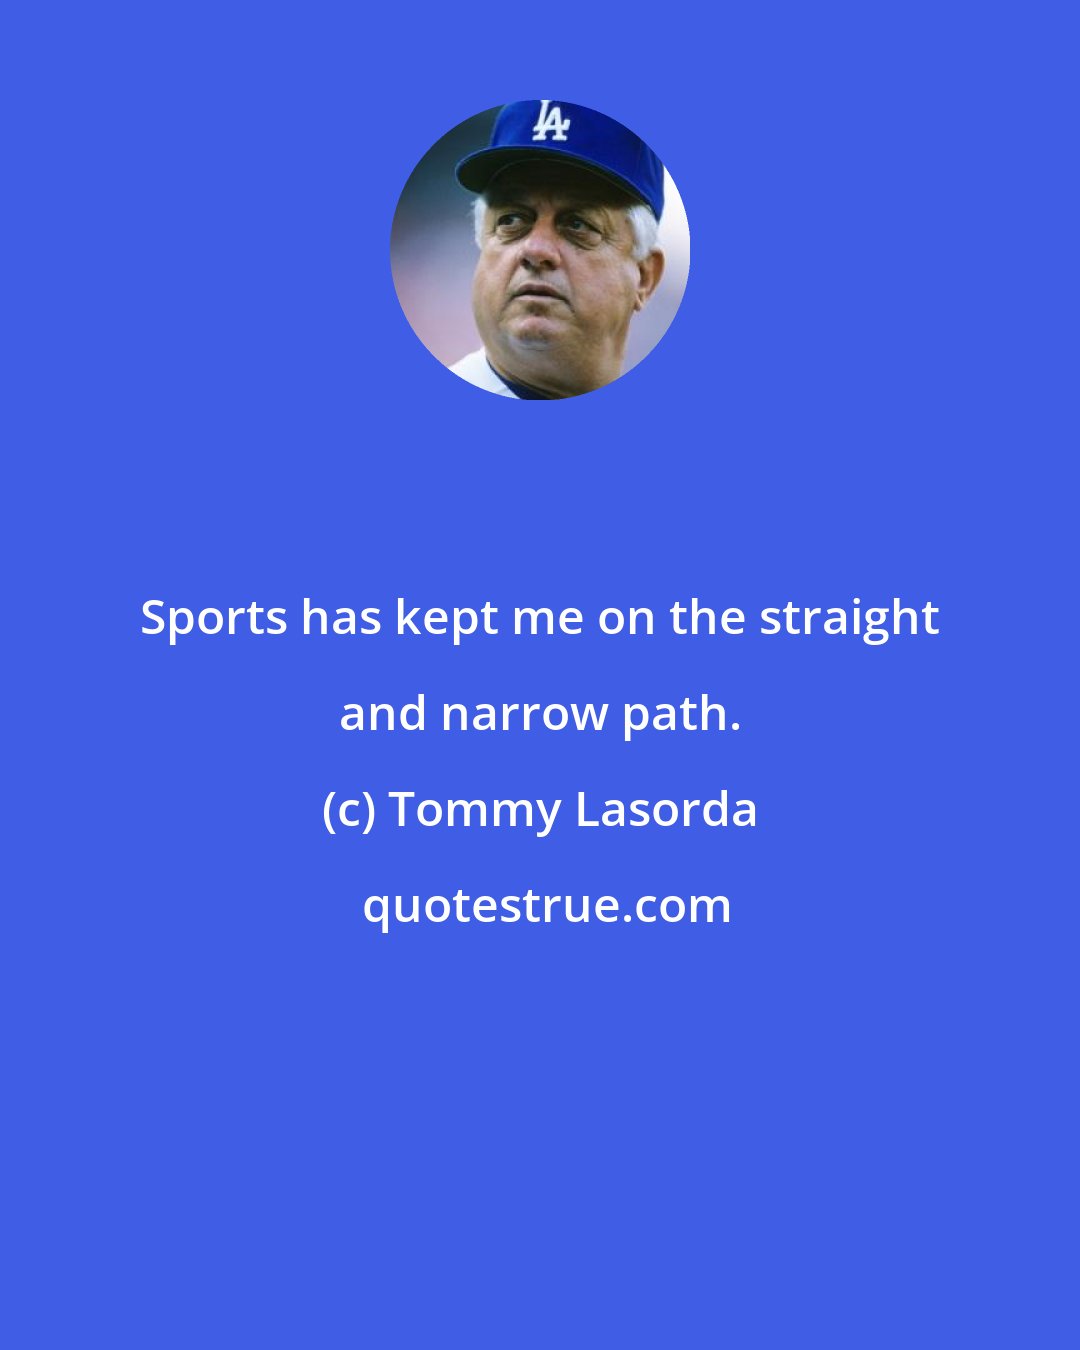 Tommy Lasorda: Sports has kept me on the straight and narrow path.